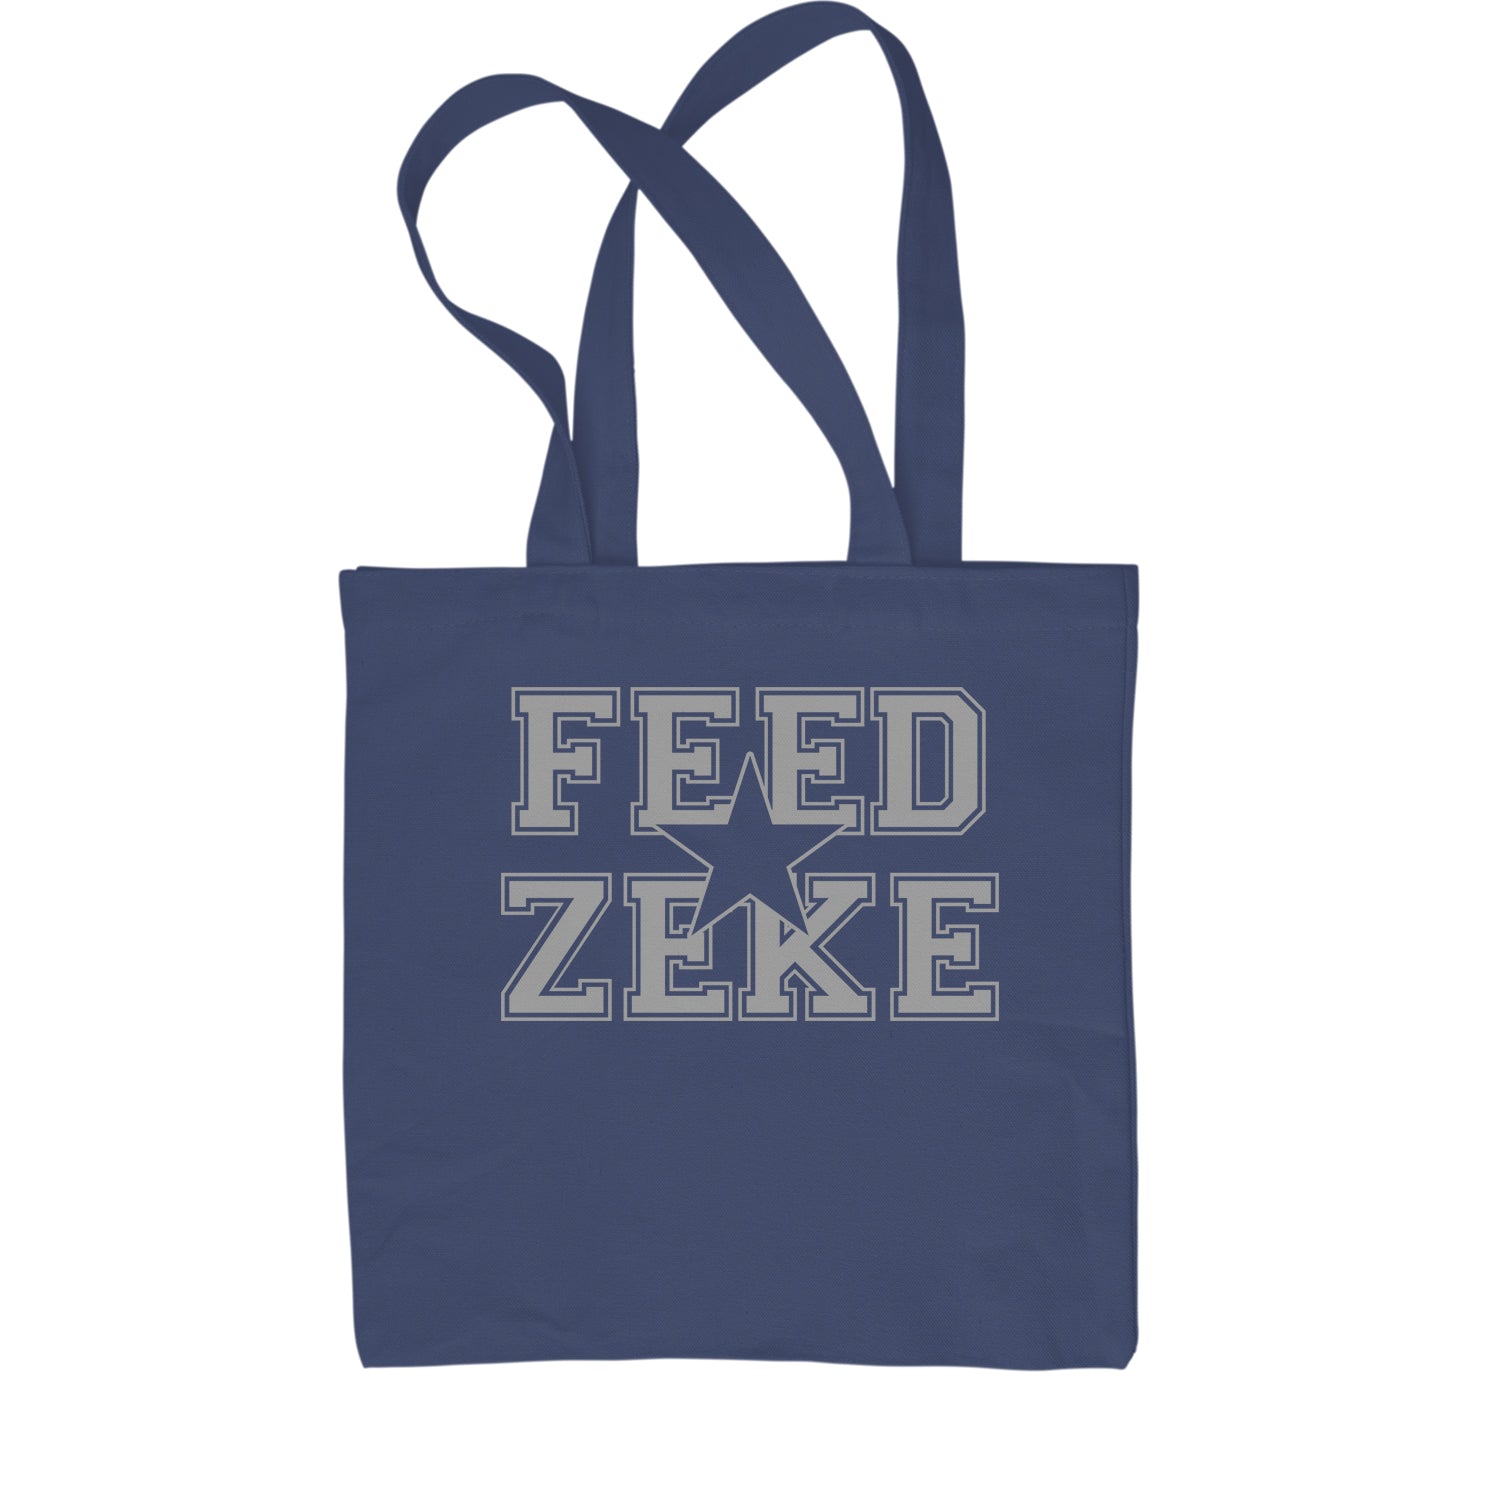 Feed Zeke Shopping Tote Bag #expressiontees by Expression Tees